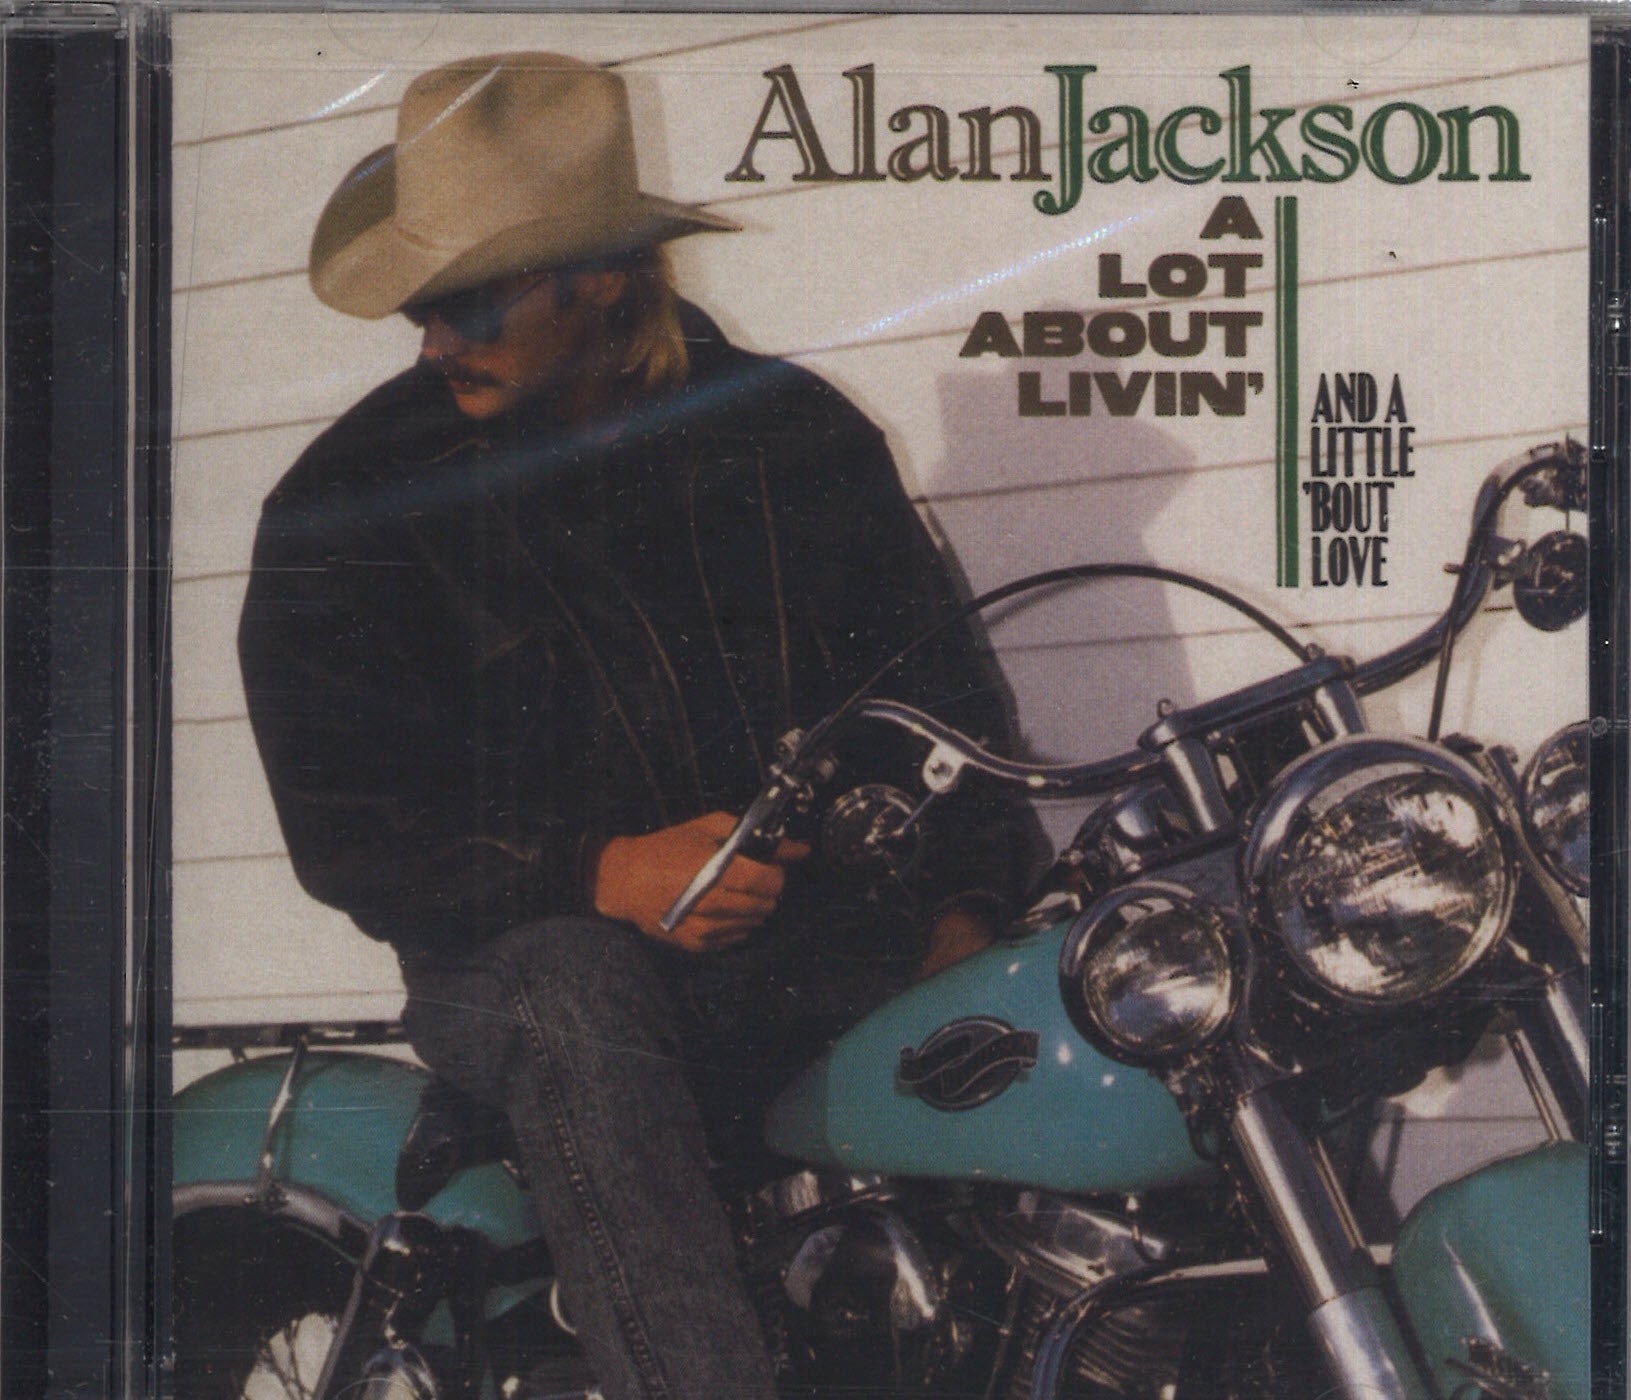 Alan Jackson A Lot About Livin' And A Little 'Bout Love